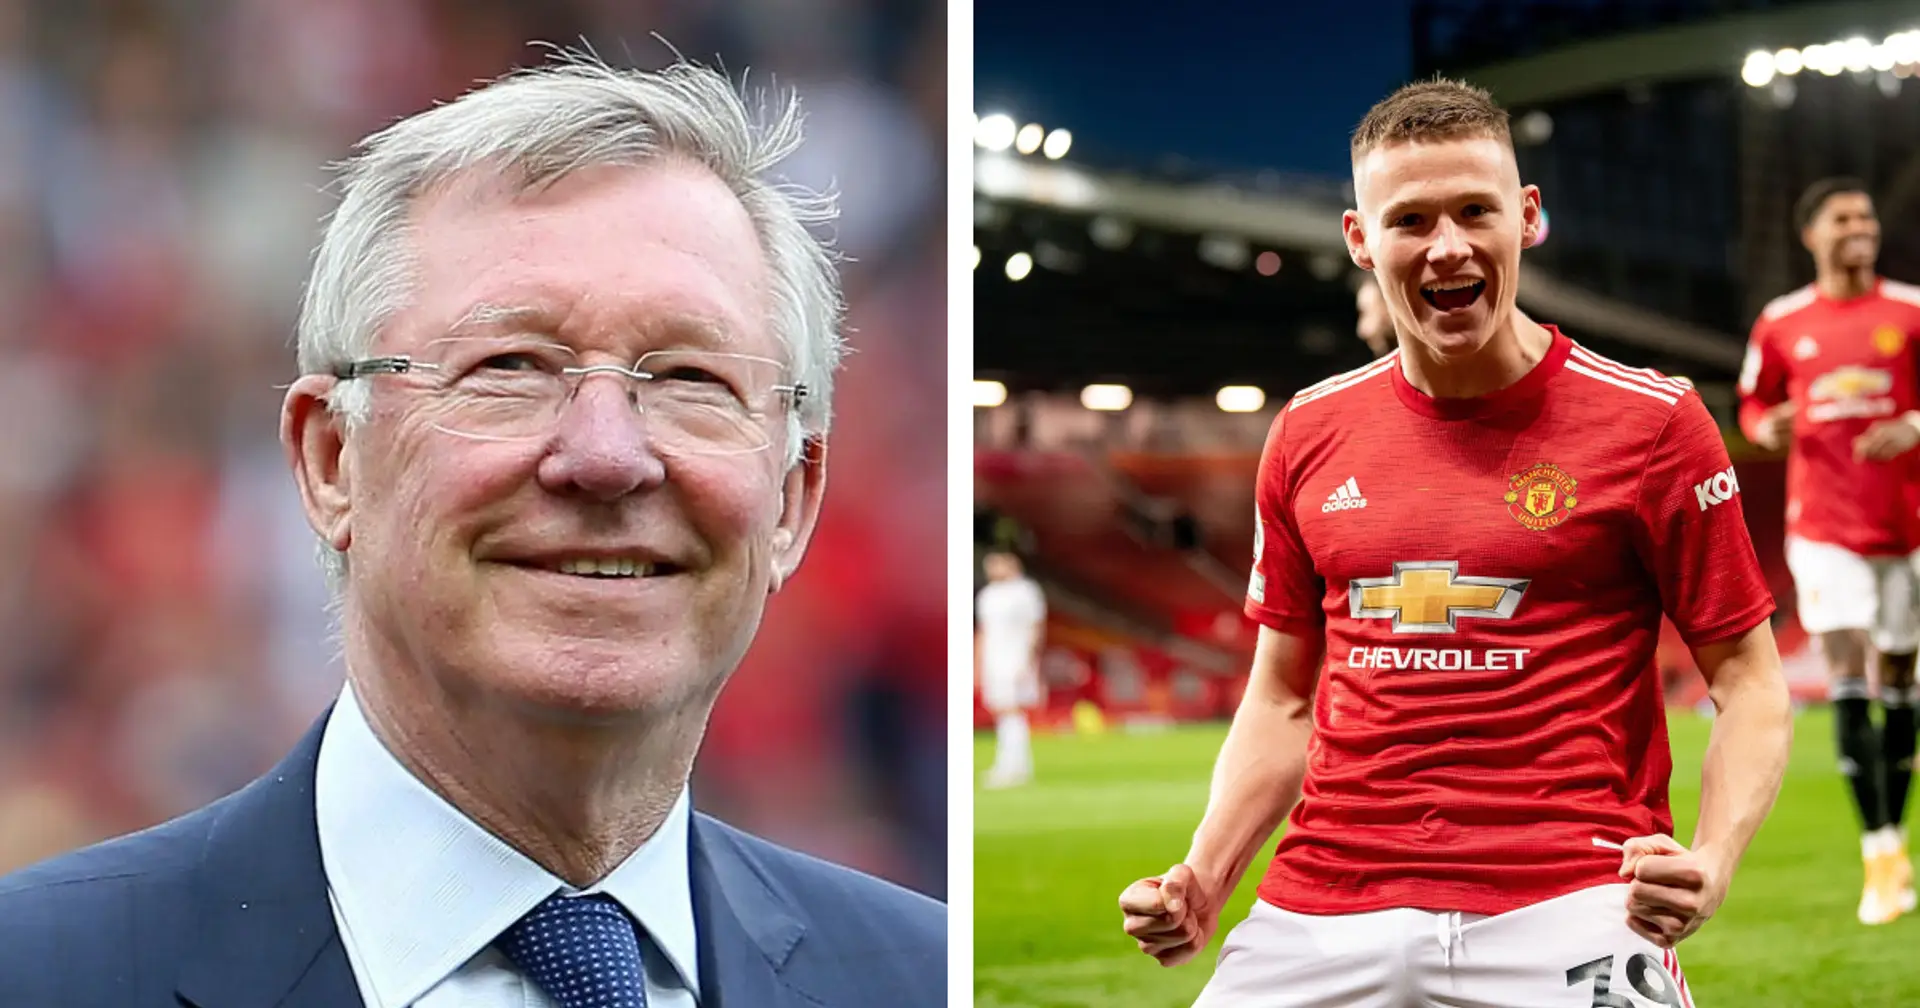 'It’s really rewarding': Sir Alex Ferguson delighted that Scott McTominay is a 'big player' for Man United